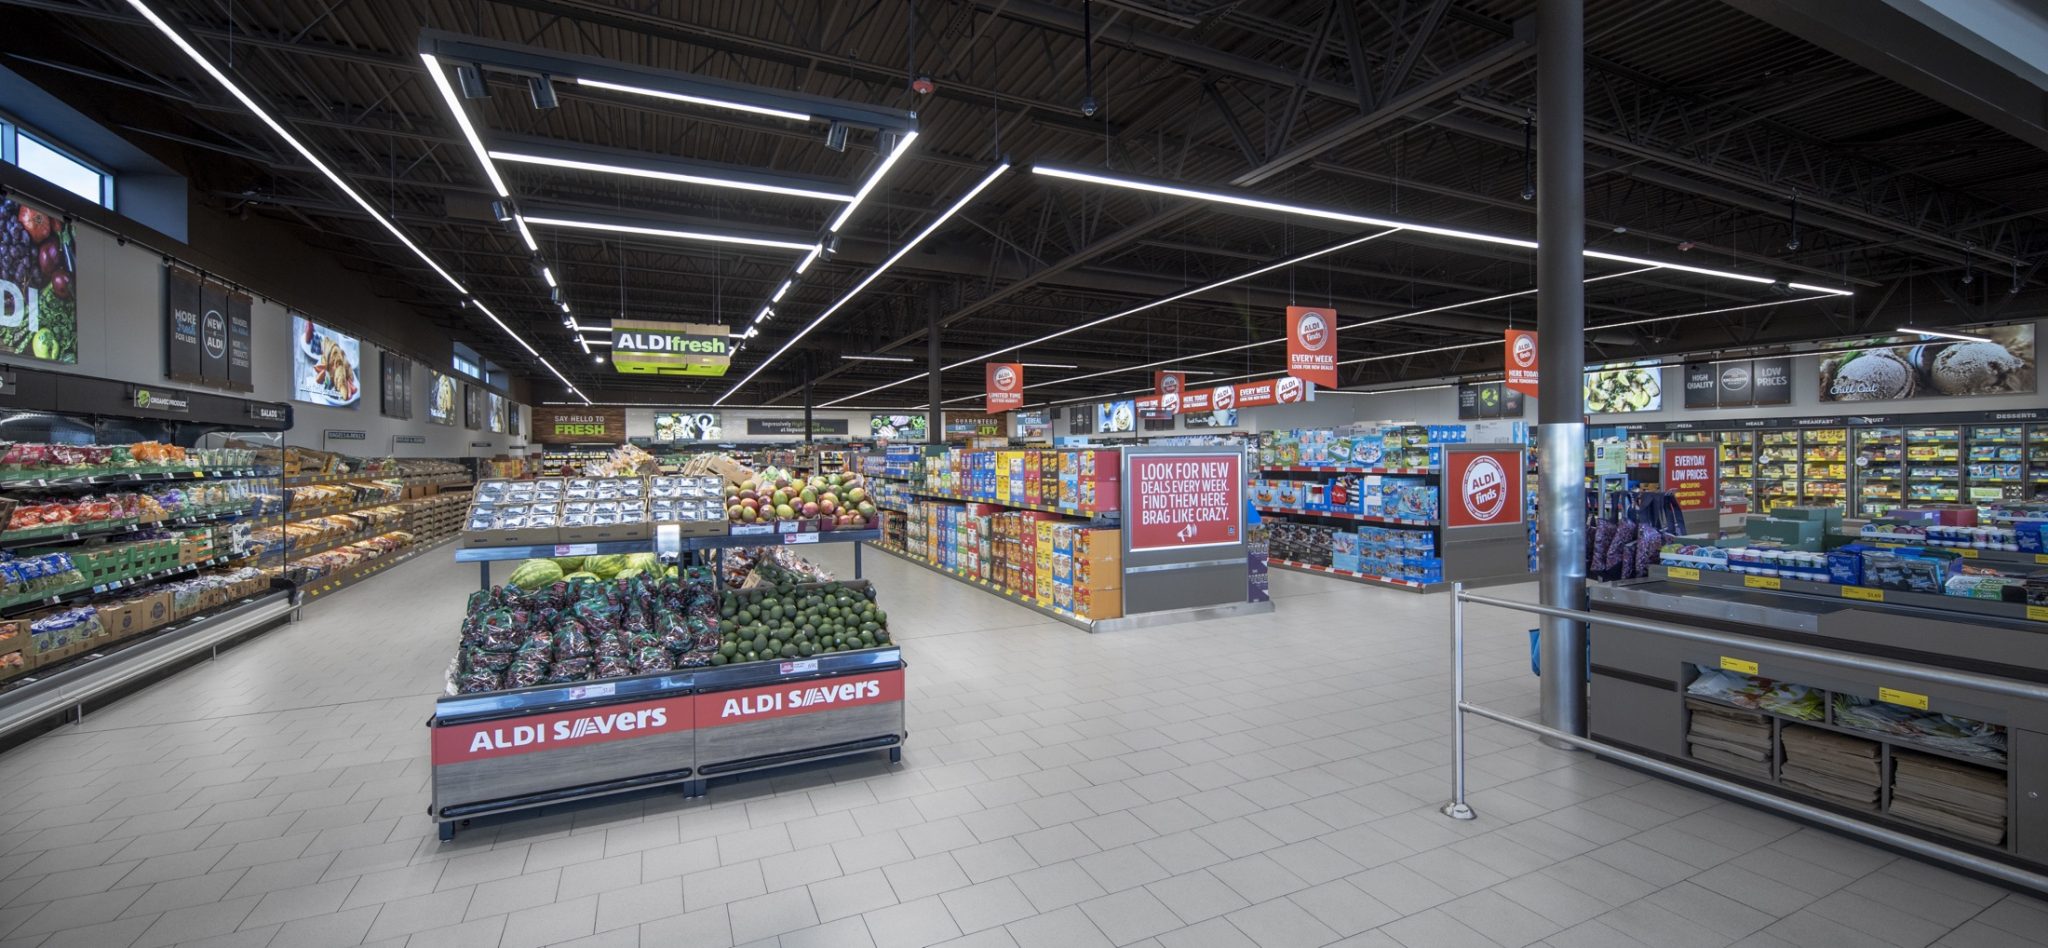 ALDI, A Popular Discount Supermarket Similar To Trader Joe’s Is Coming Soon To Lafayette